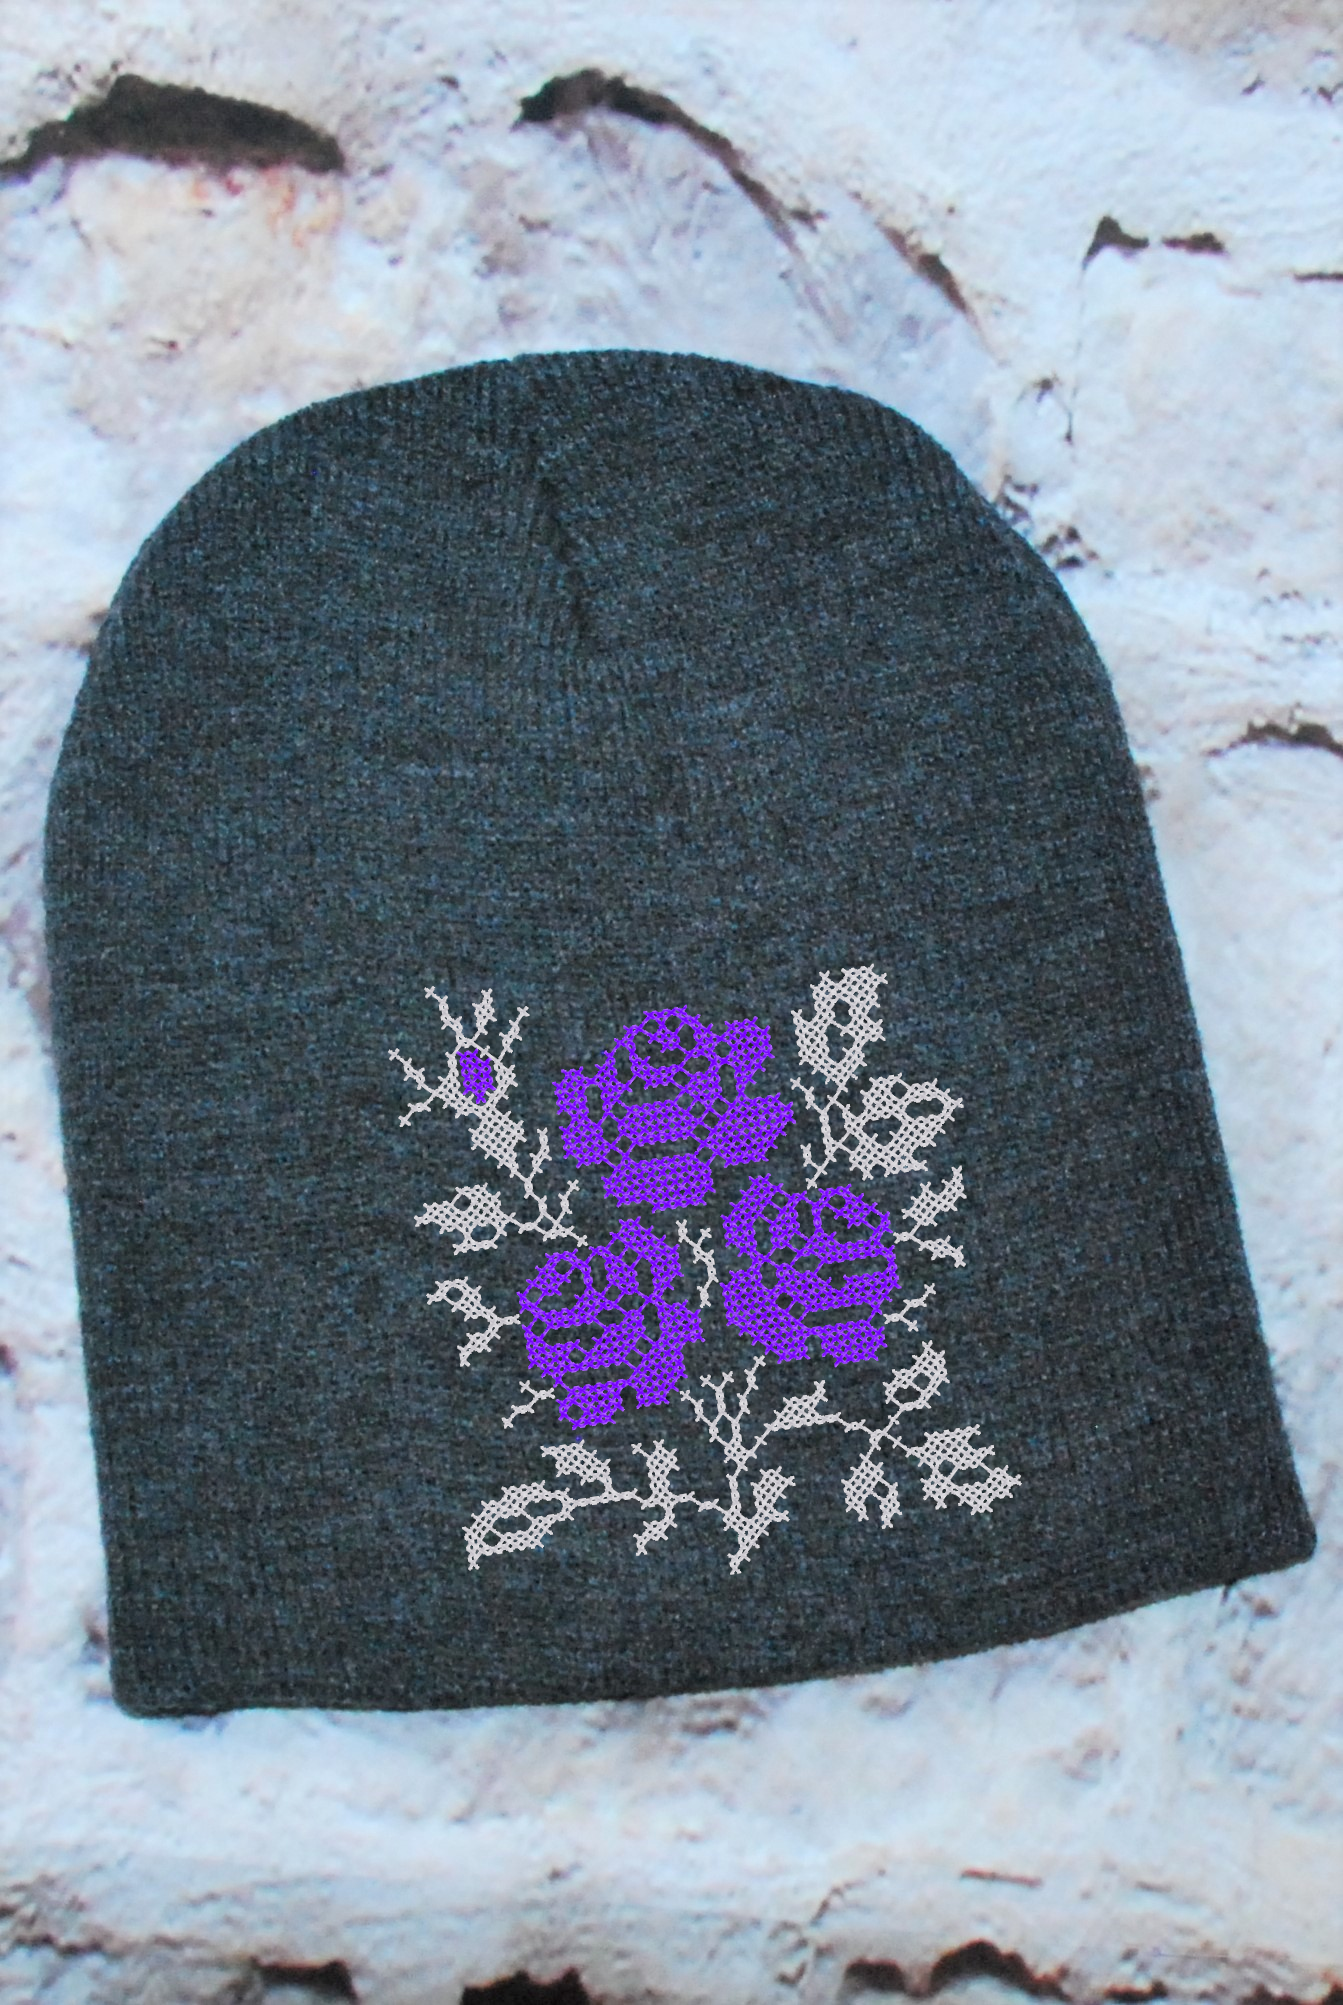 Knitted embroidered beanie hat "Roses"